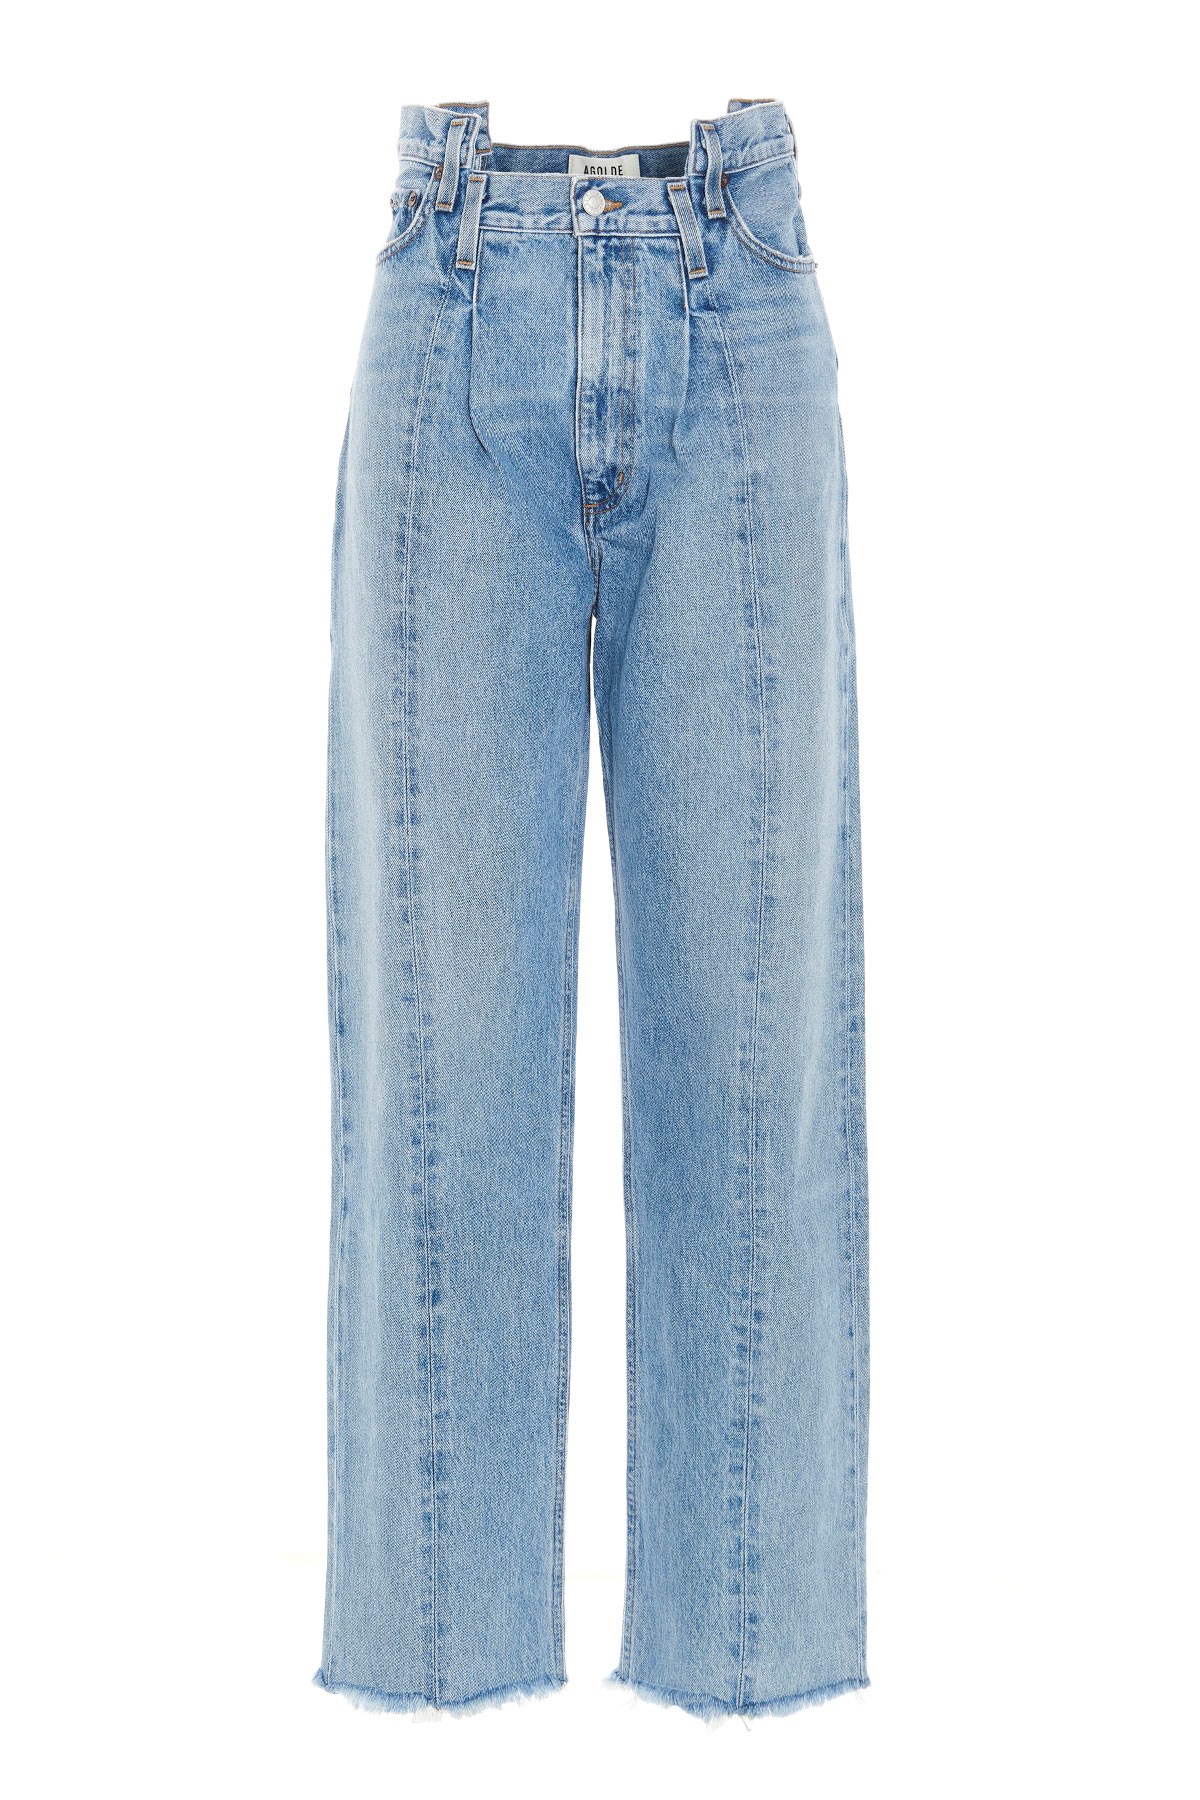 AGOLDE Jeans 'Pieced Angled'